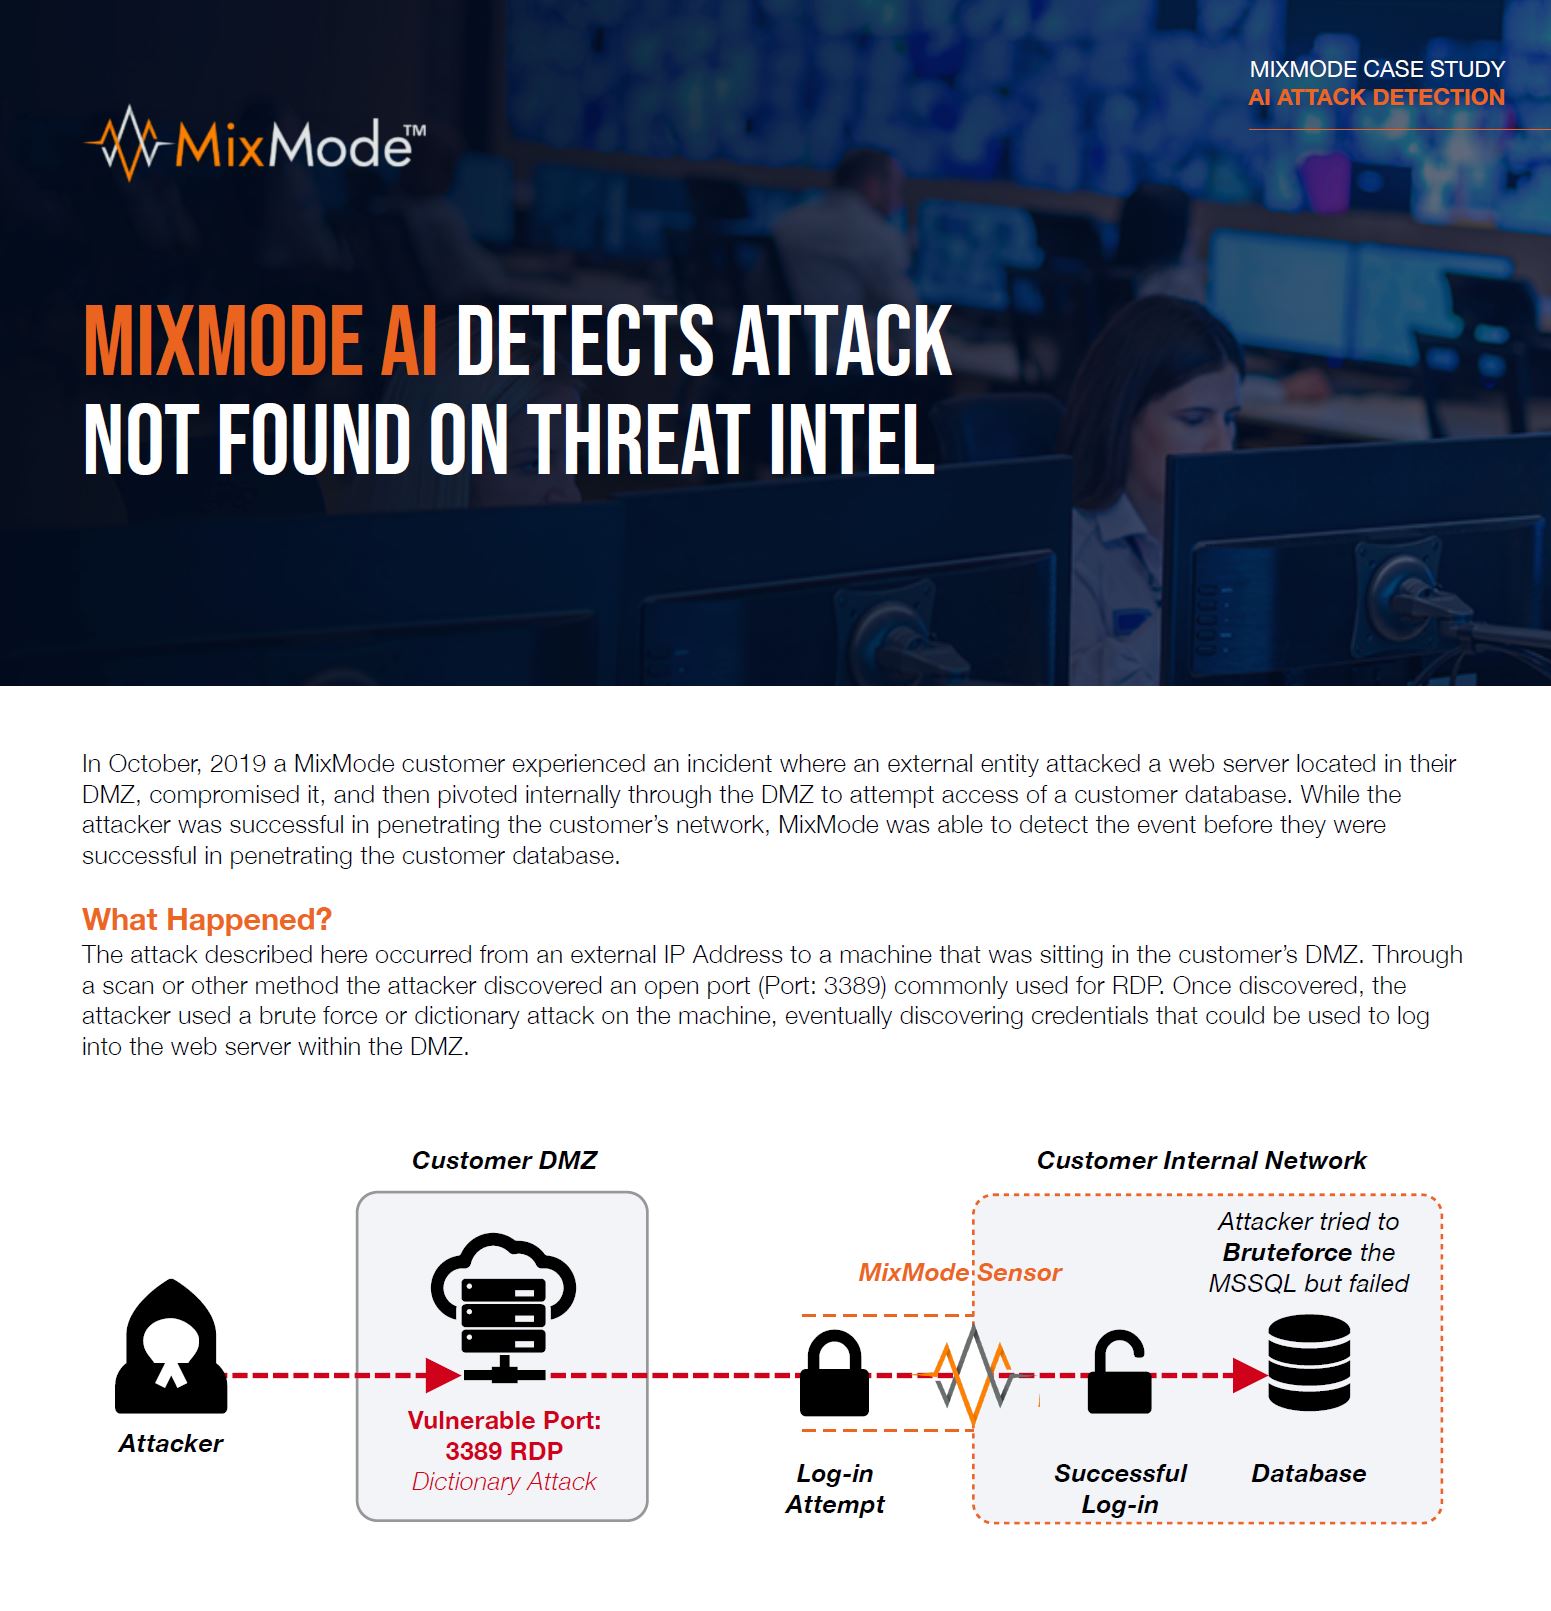 Case Study - MixModeAI Detects Attack Not Found on Threat Intel